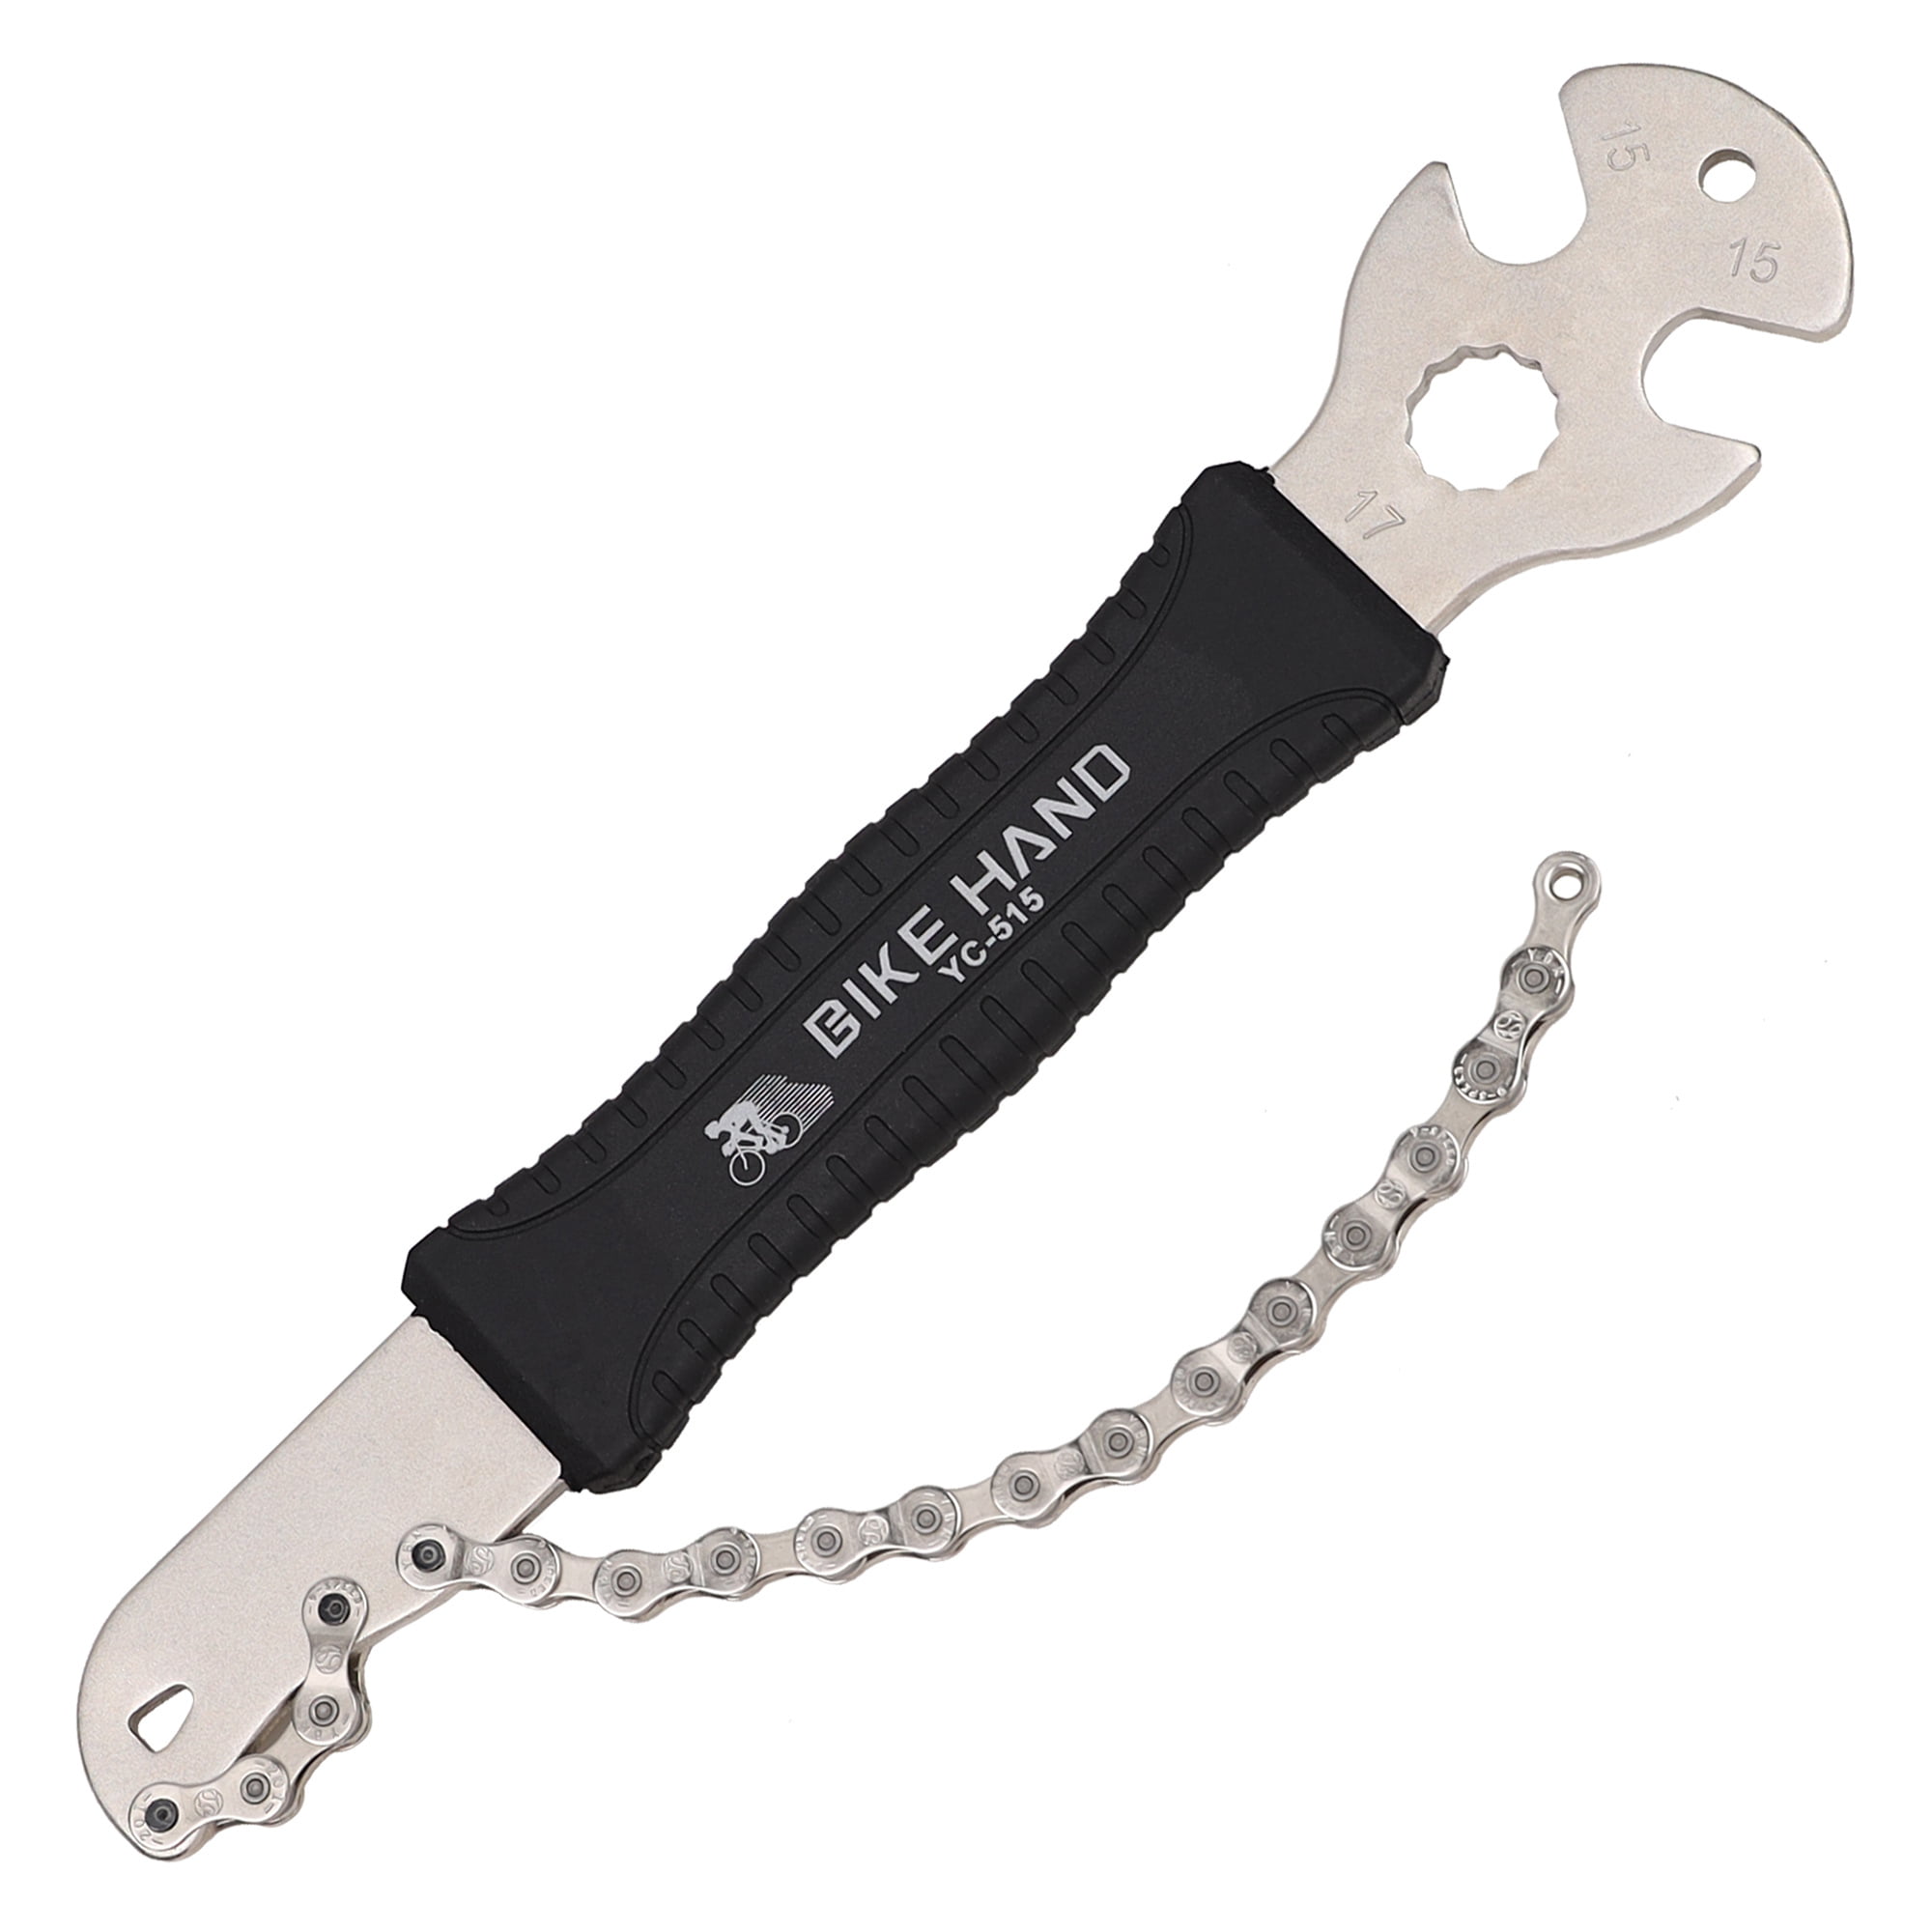 Sunlite Single Handed Cog Tool Tool Chain Whip Single Handed Cog Remover 10-19t 